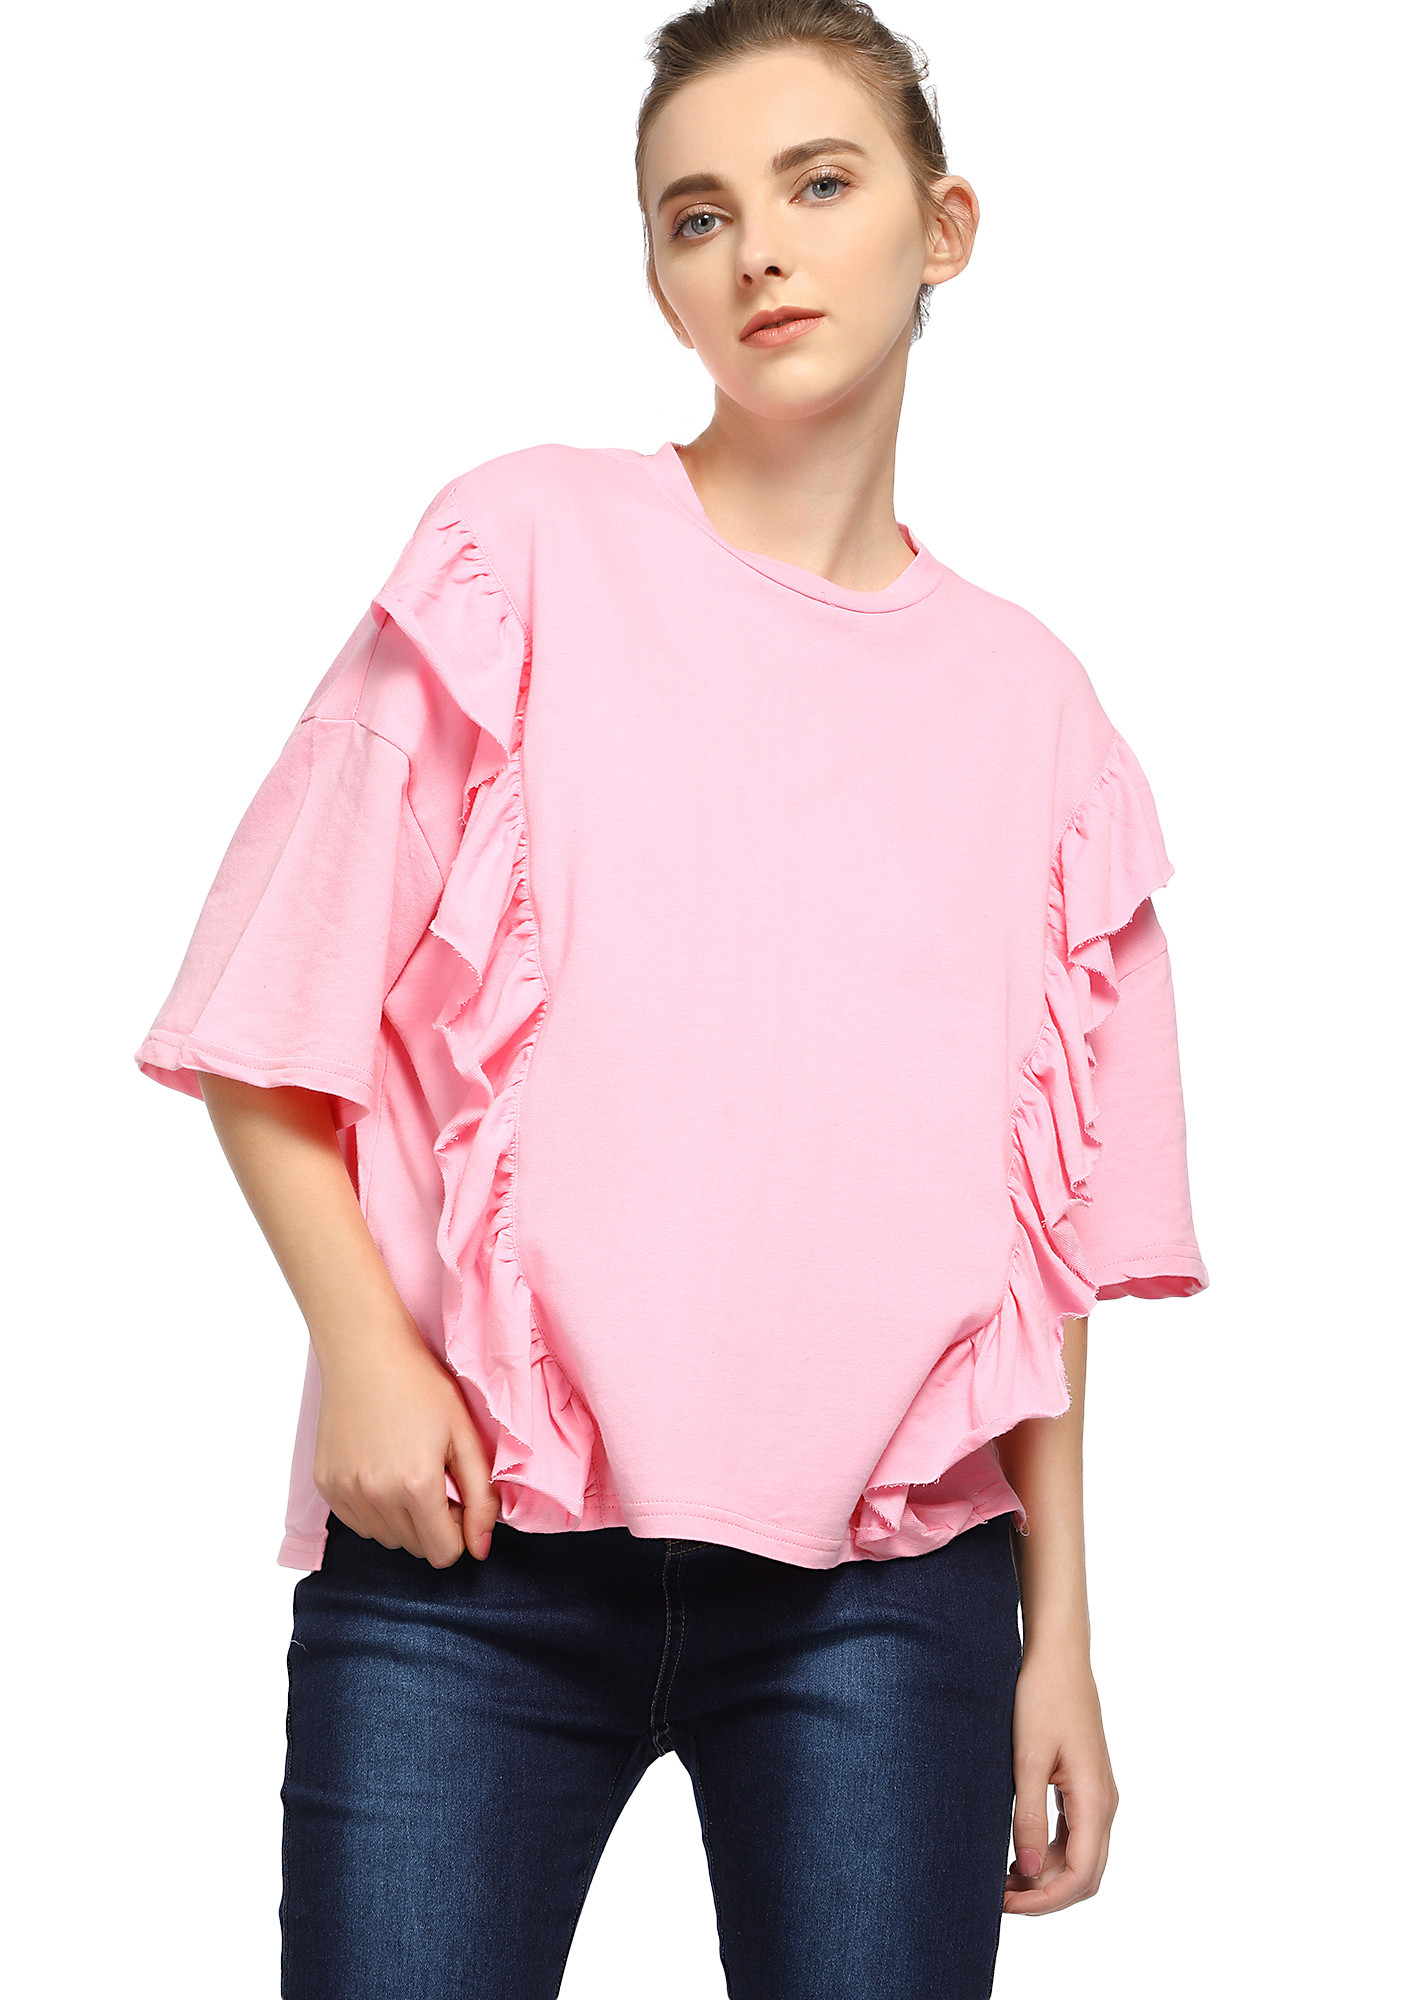 RUFFLE IN A BLISS PINK T-SHIRT